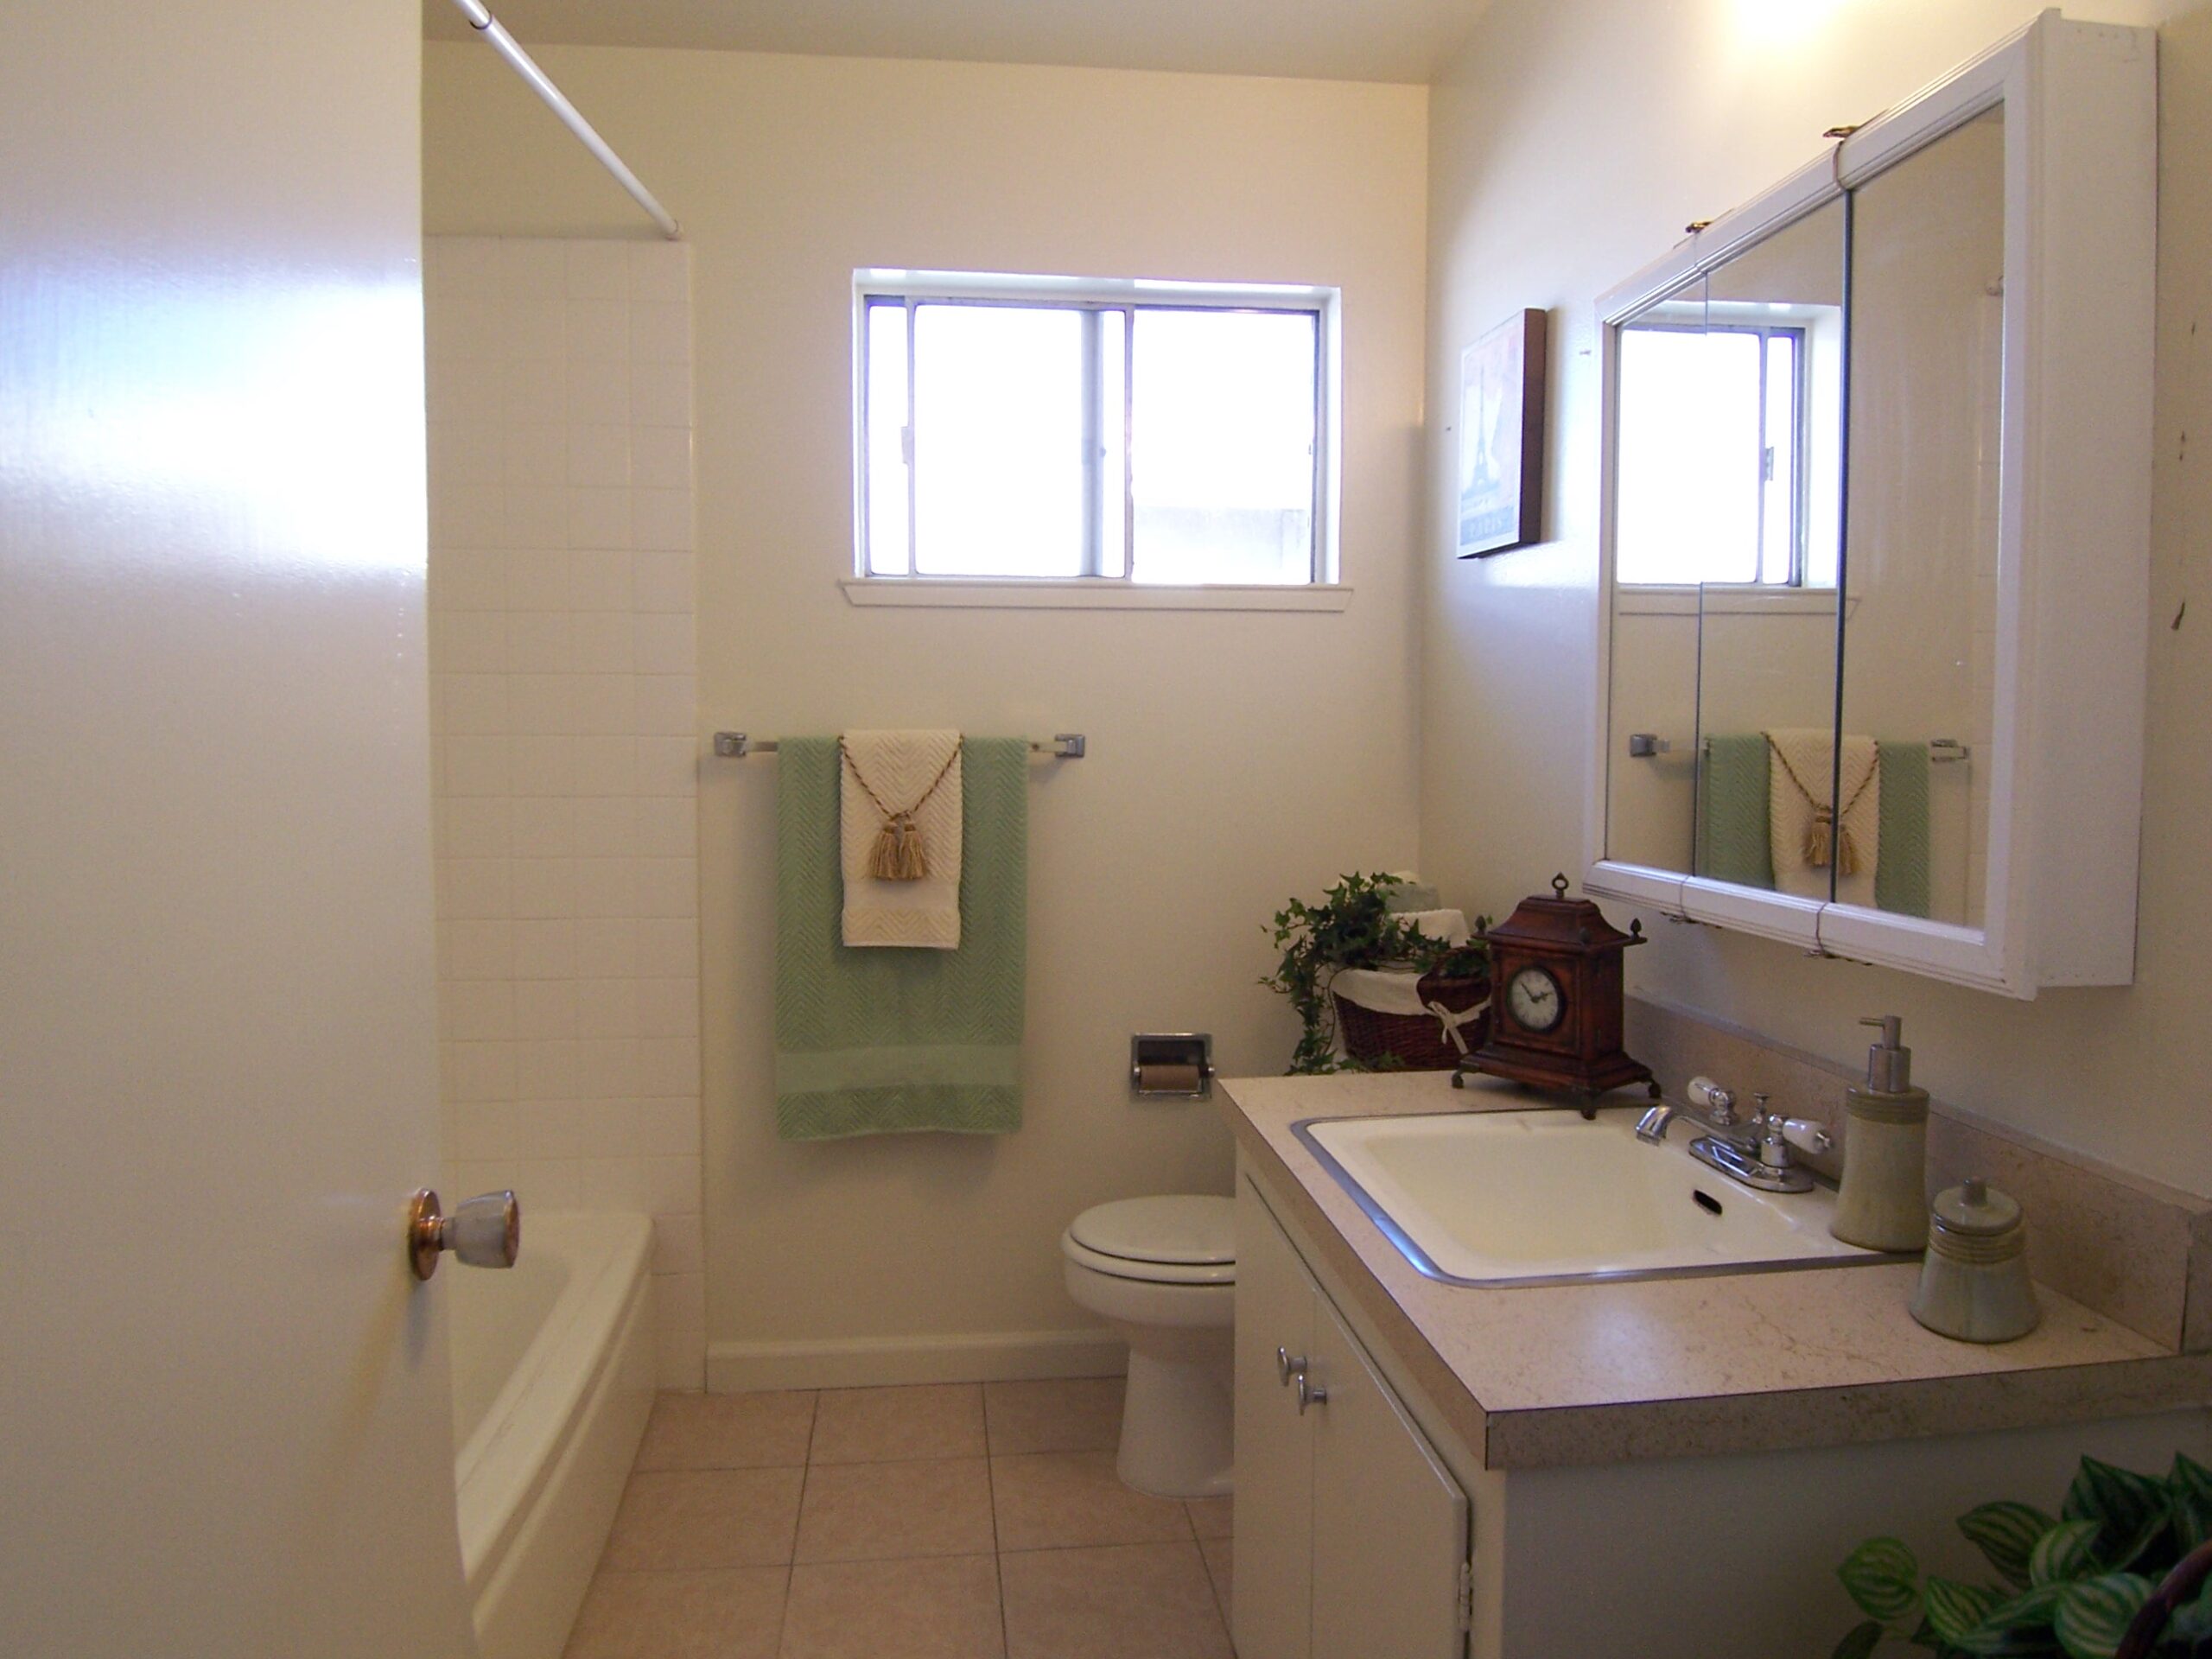 A bathroom with white tile and green towels.